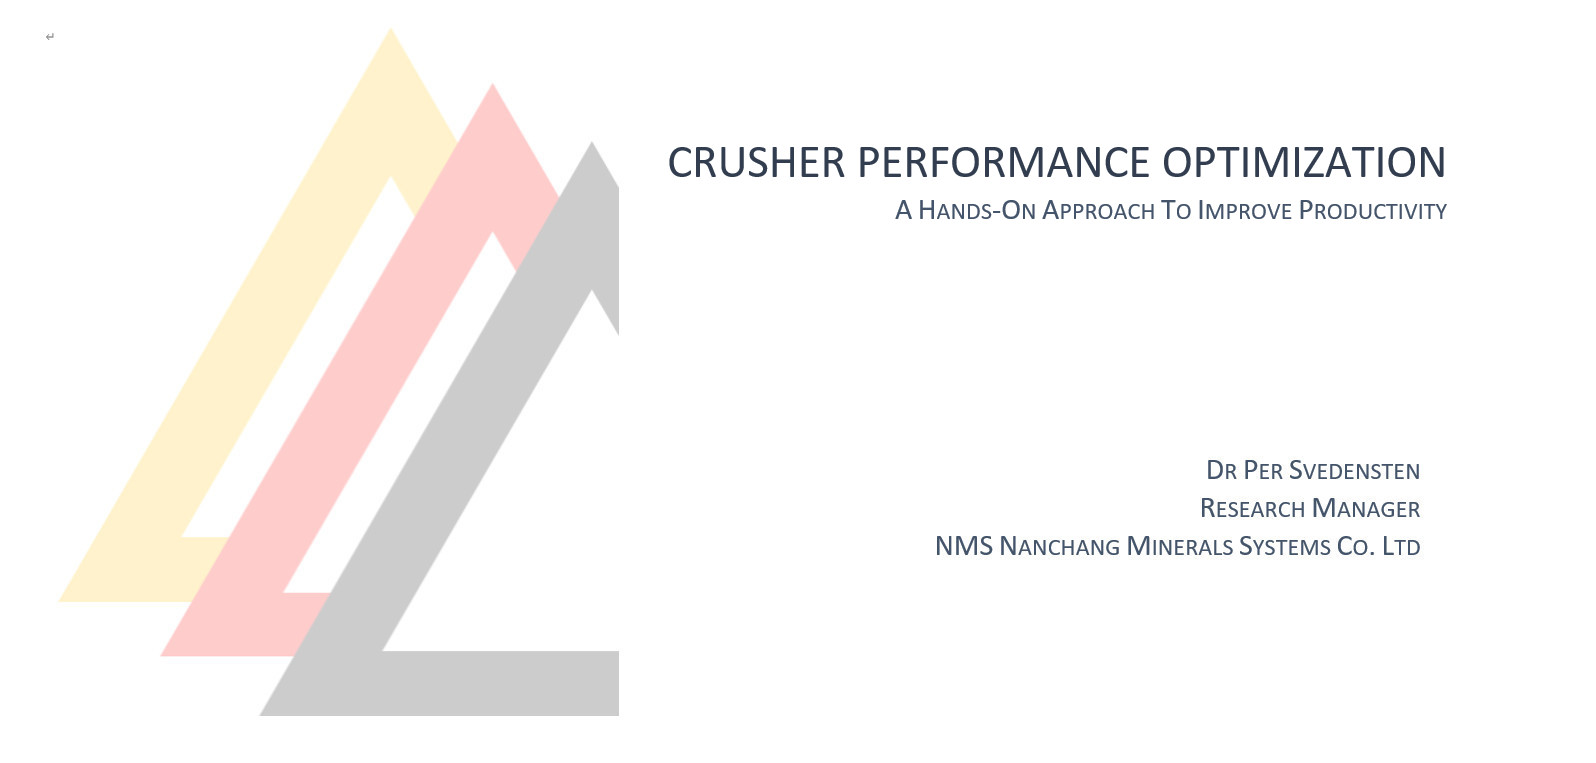 Crusher Performance Optimization - A Hands-on Approach to Improve Productivity